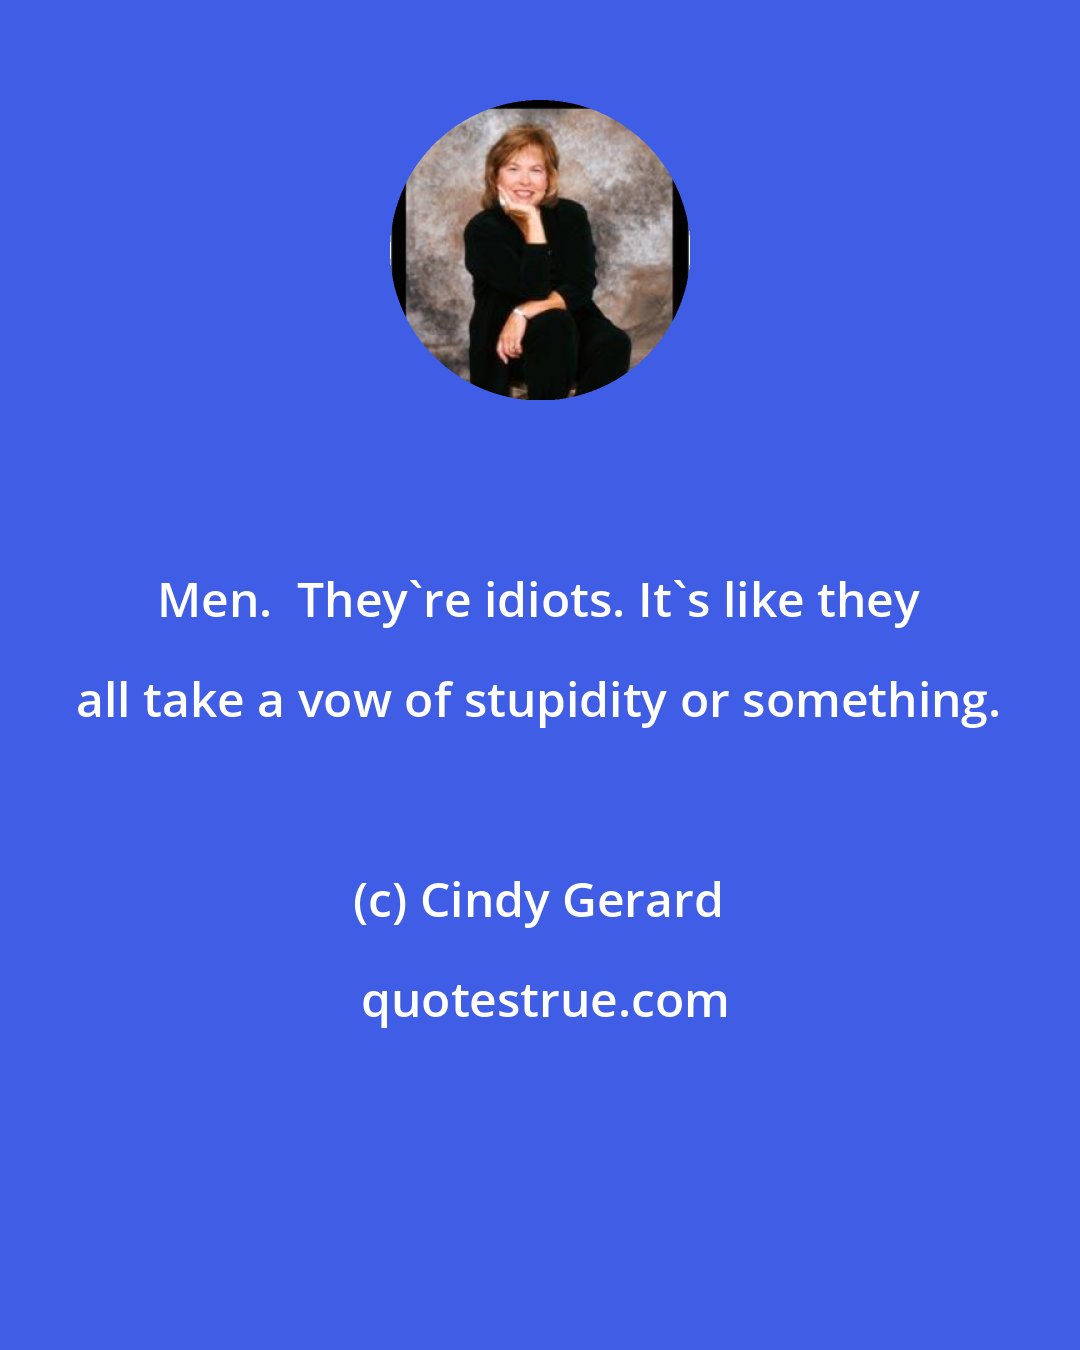 Cindy Gerard: Men.  They're idiots. It's like they all take a vow of stupidity or something.